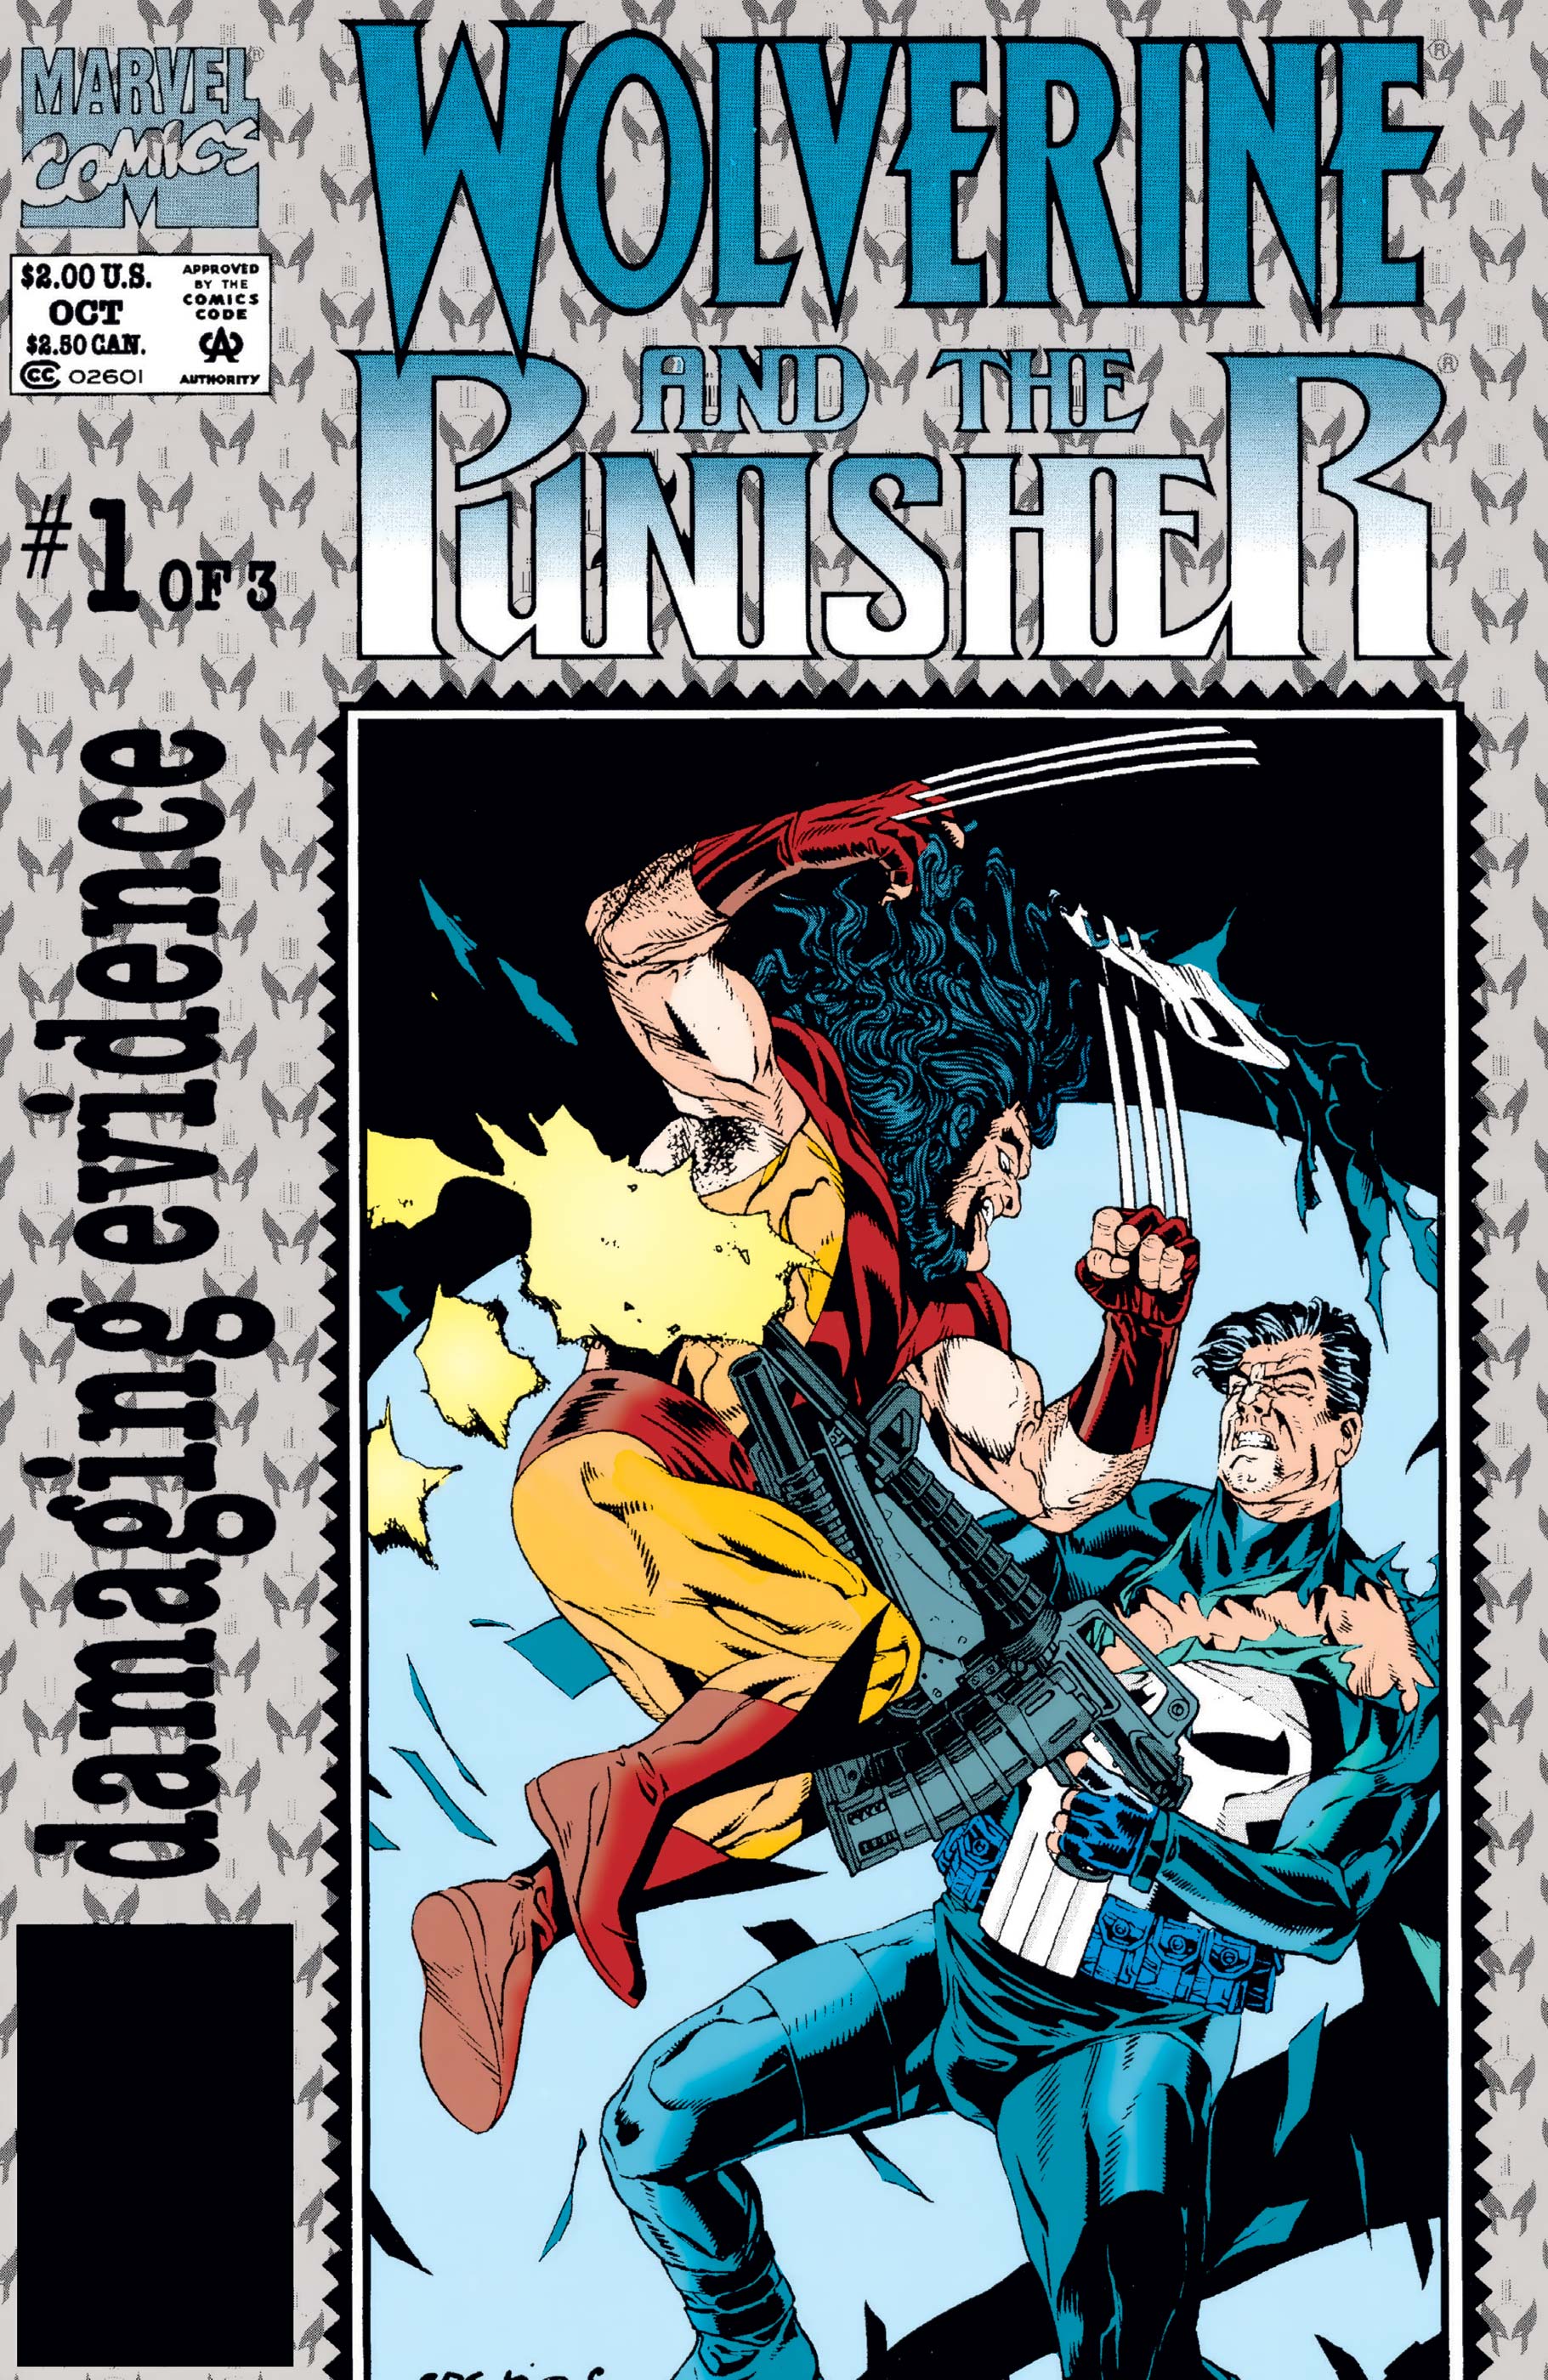 Wolverine and The Punisher: Damaging Evidence (1993) #1